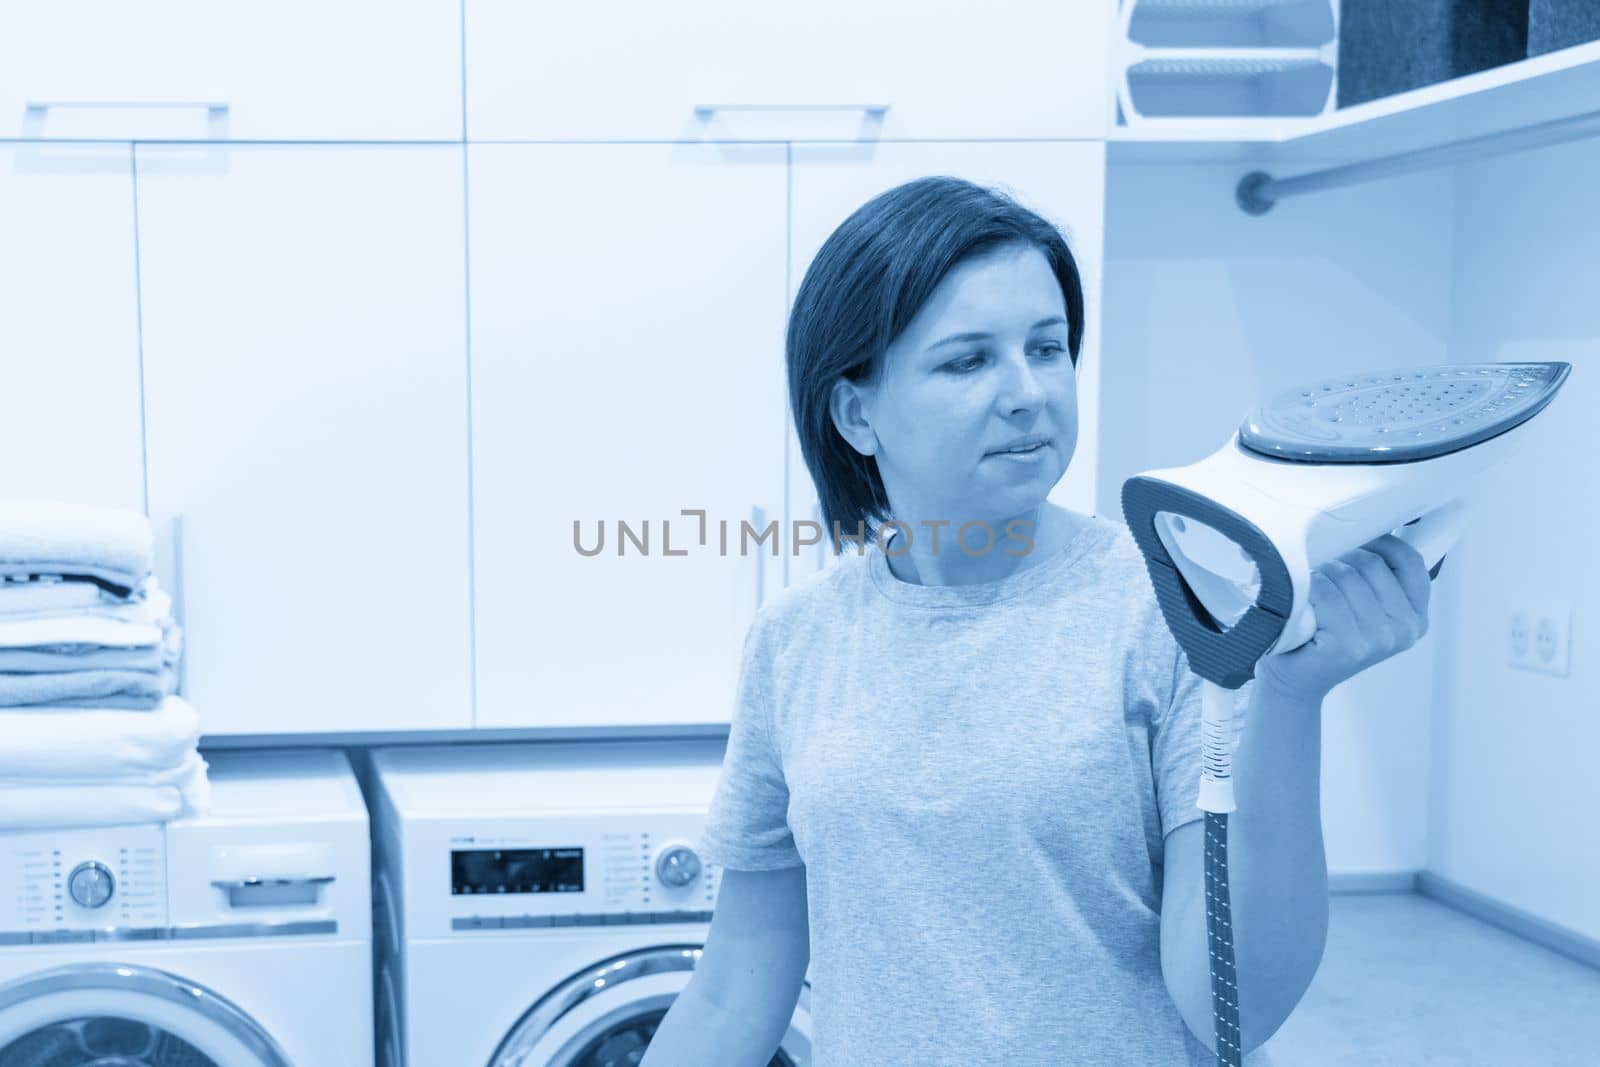 Woman ironing white shirt on board in laundry room with washing machine